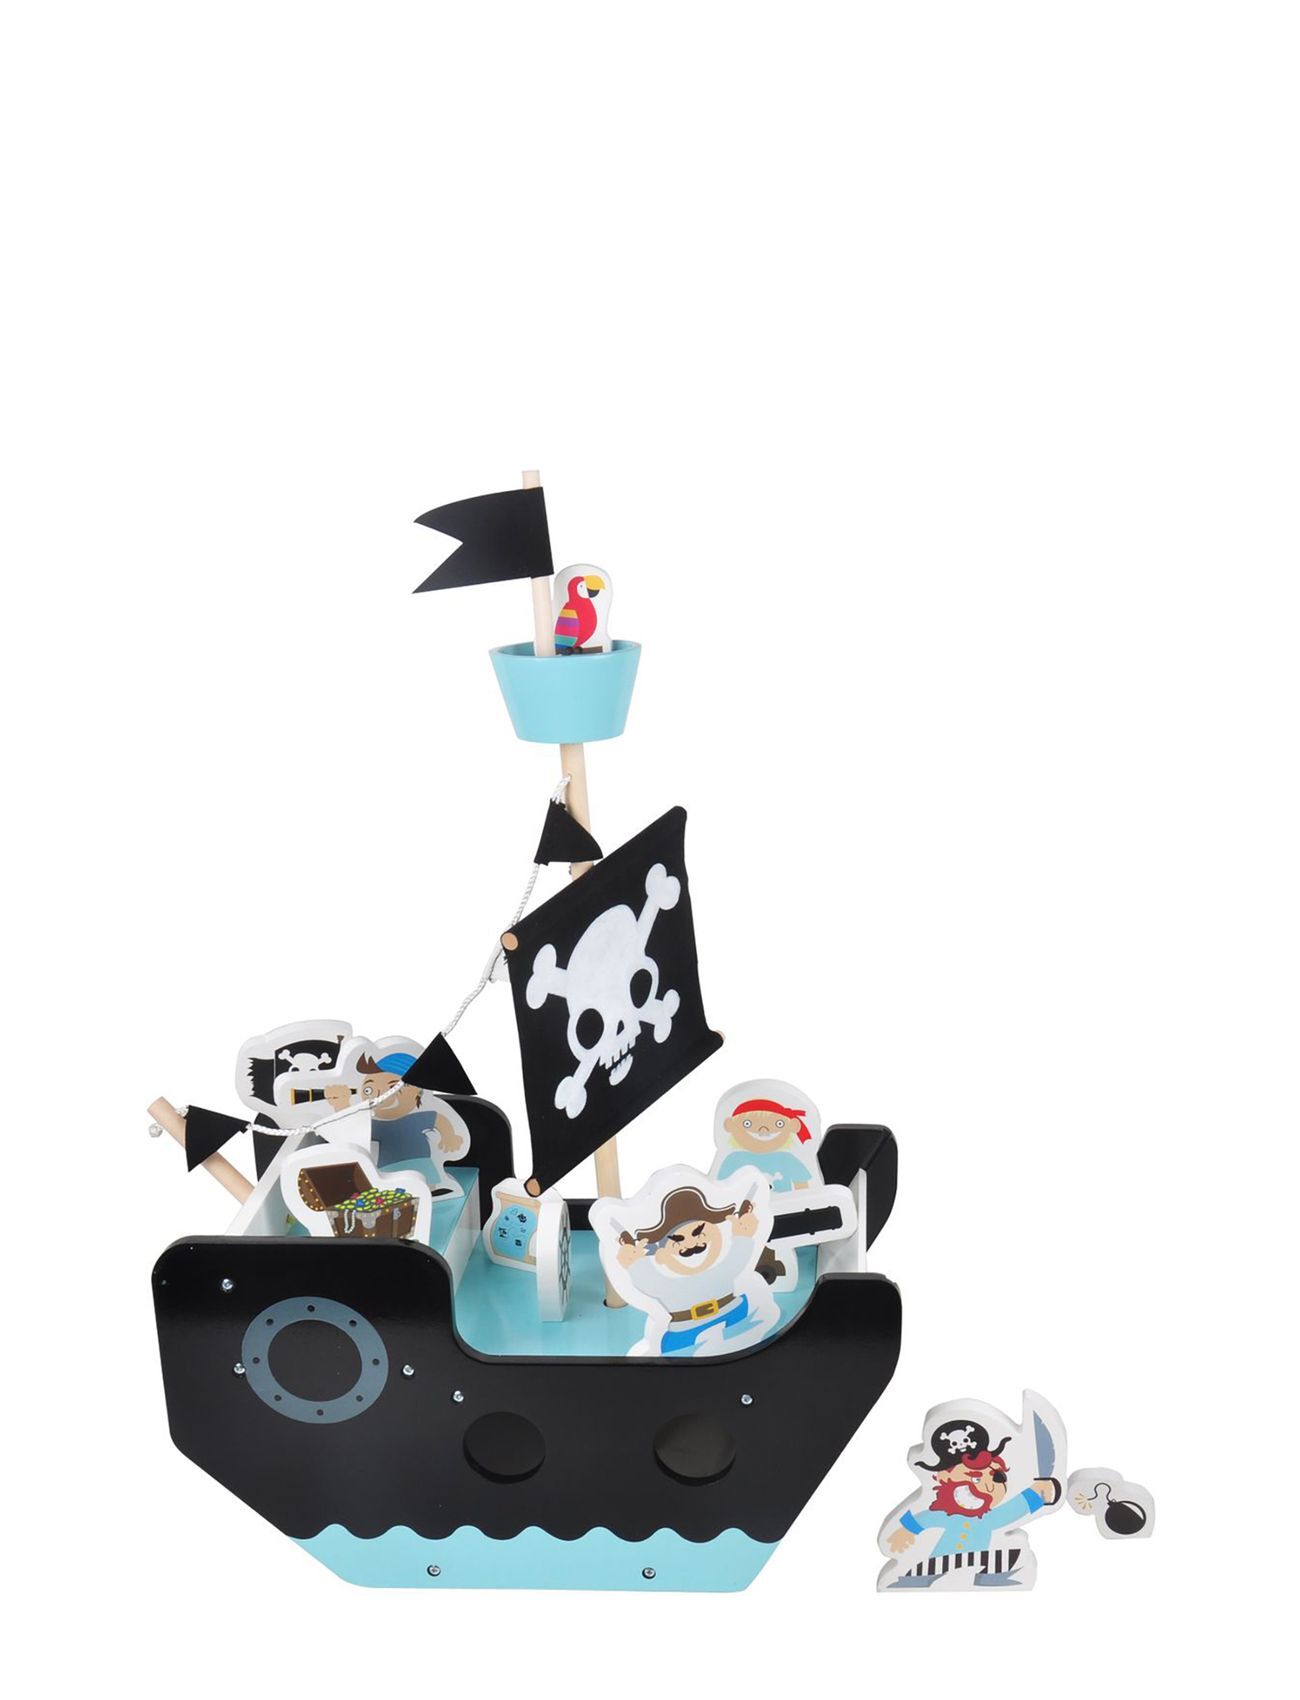 Magni Toys Pirate Ship With 11 Figures Toys Toy Cars & Vehicles Toy Vehicles Multi/mønstret Magni Toys